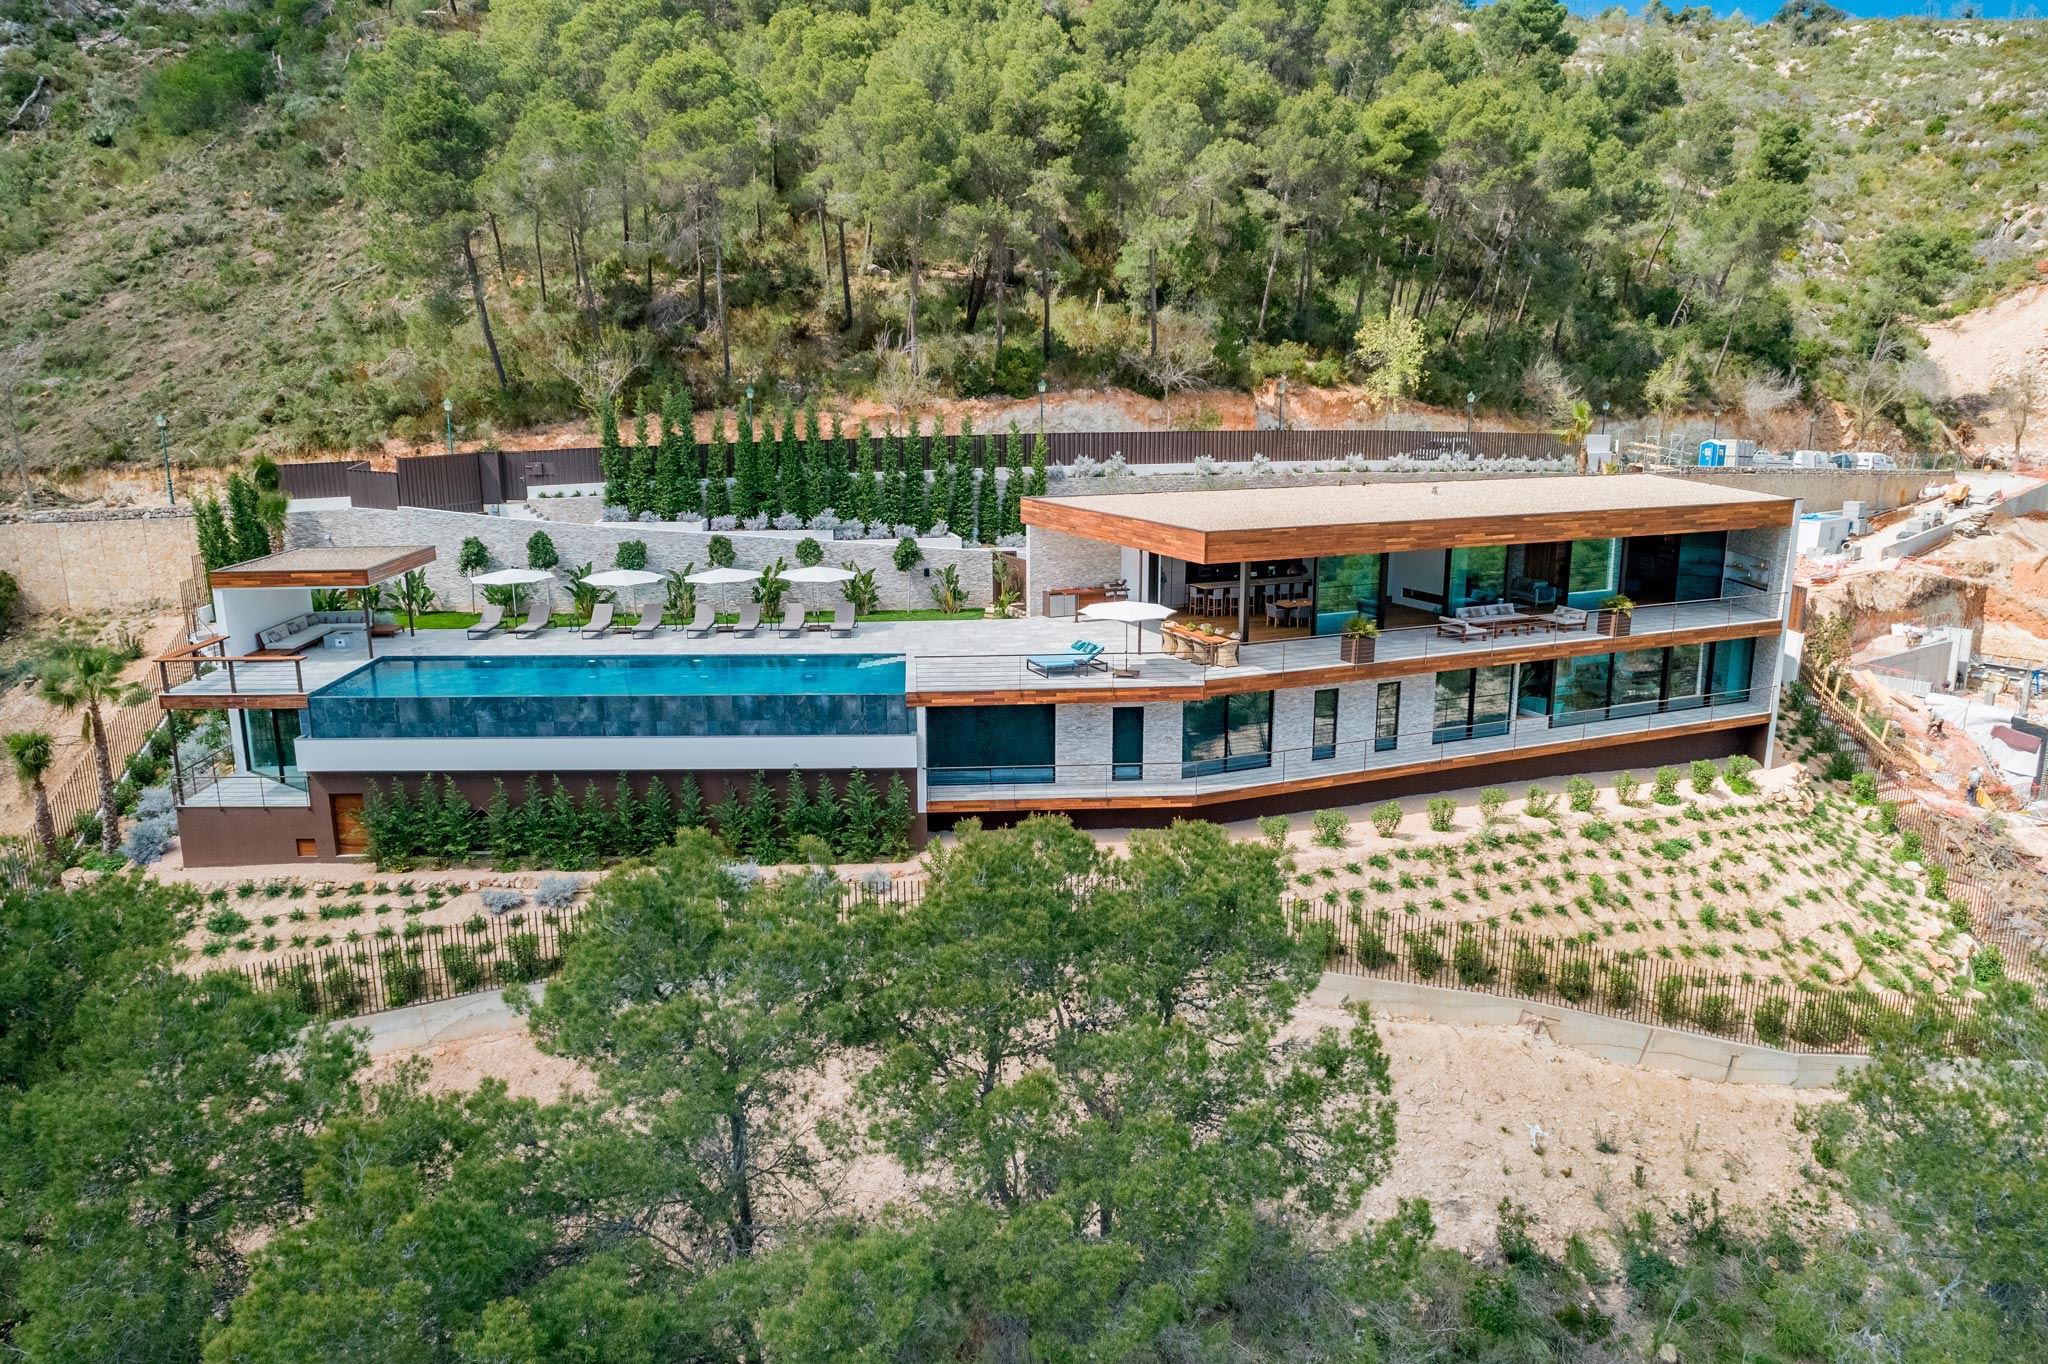 Aerial view of a modernist villa nestled in the Son Vida hills of Palma, captured by Wright Content. The luxurious home features multiple glass-fronted rooms, a spacious patio, and a pool, surrounded by lush greenery.